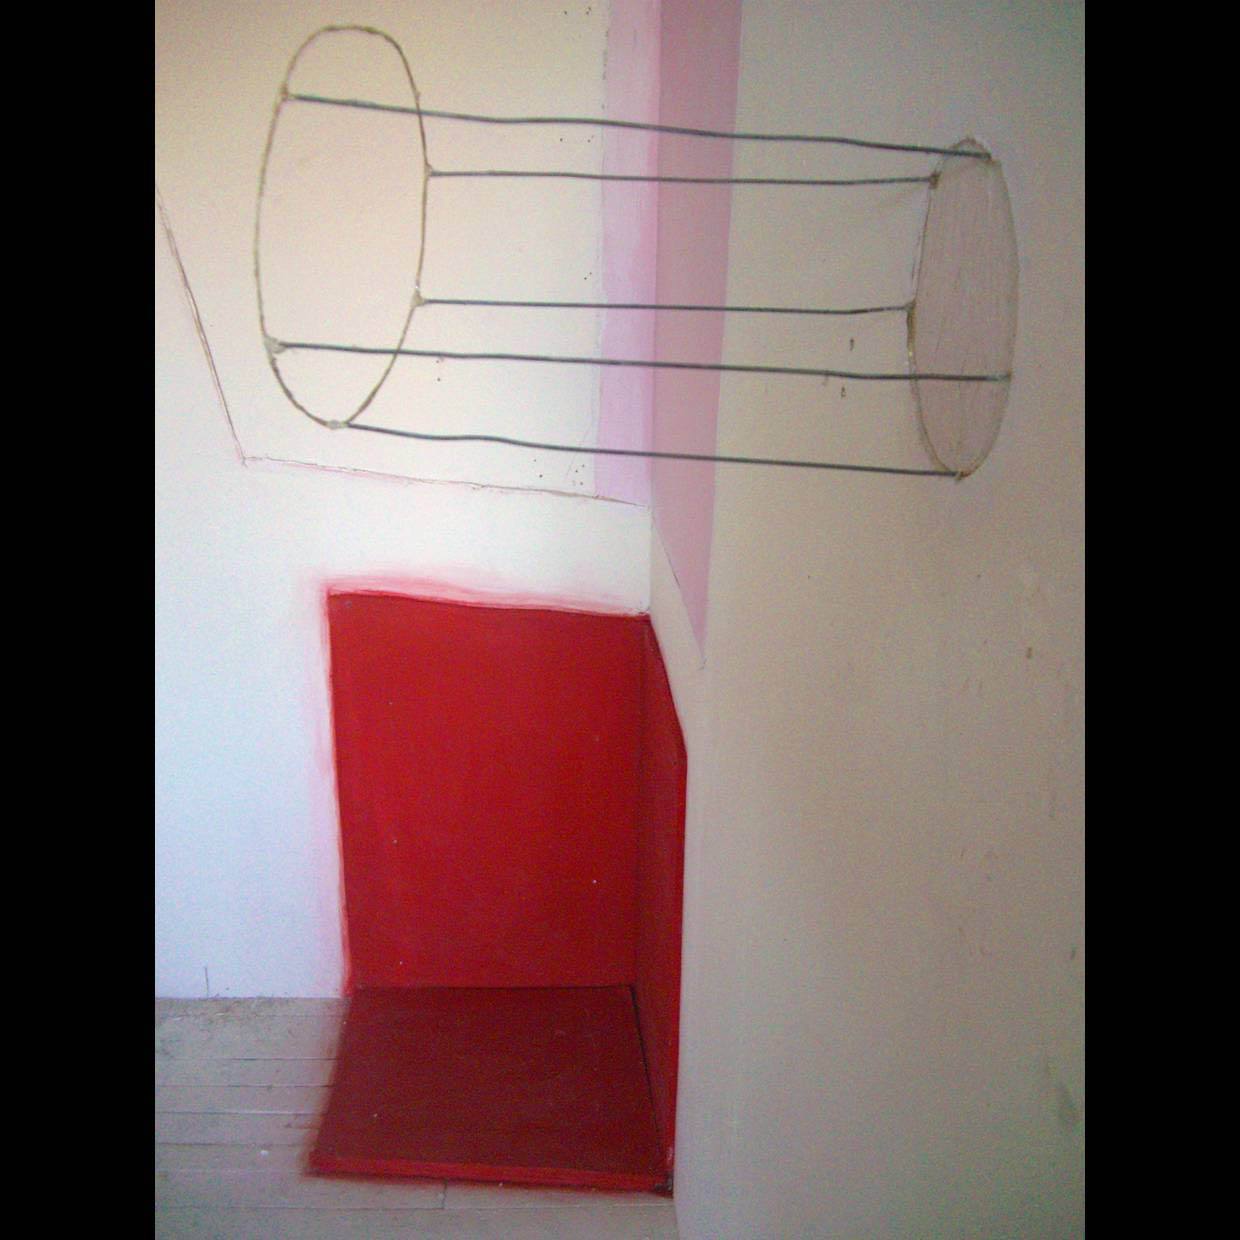 An installation image of a gallery space with three dimensional shapes drawn at the intersection of two walls